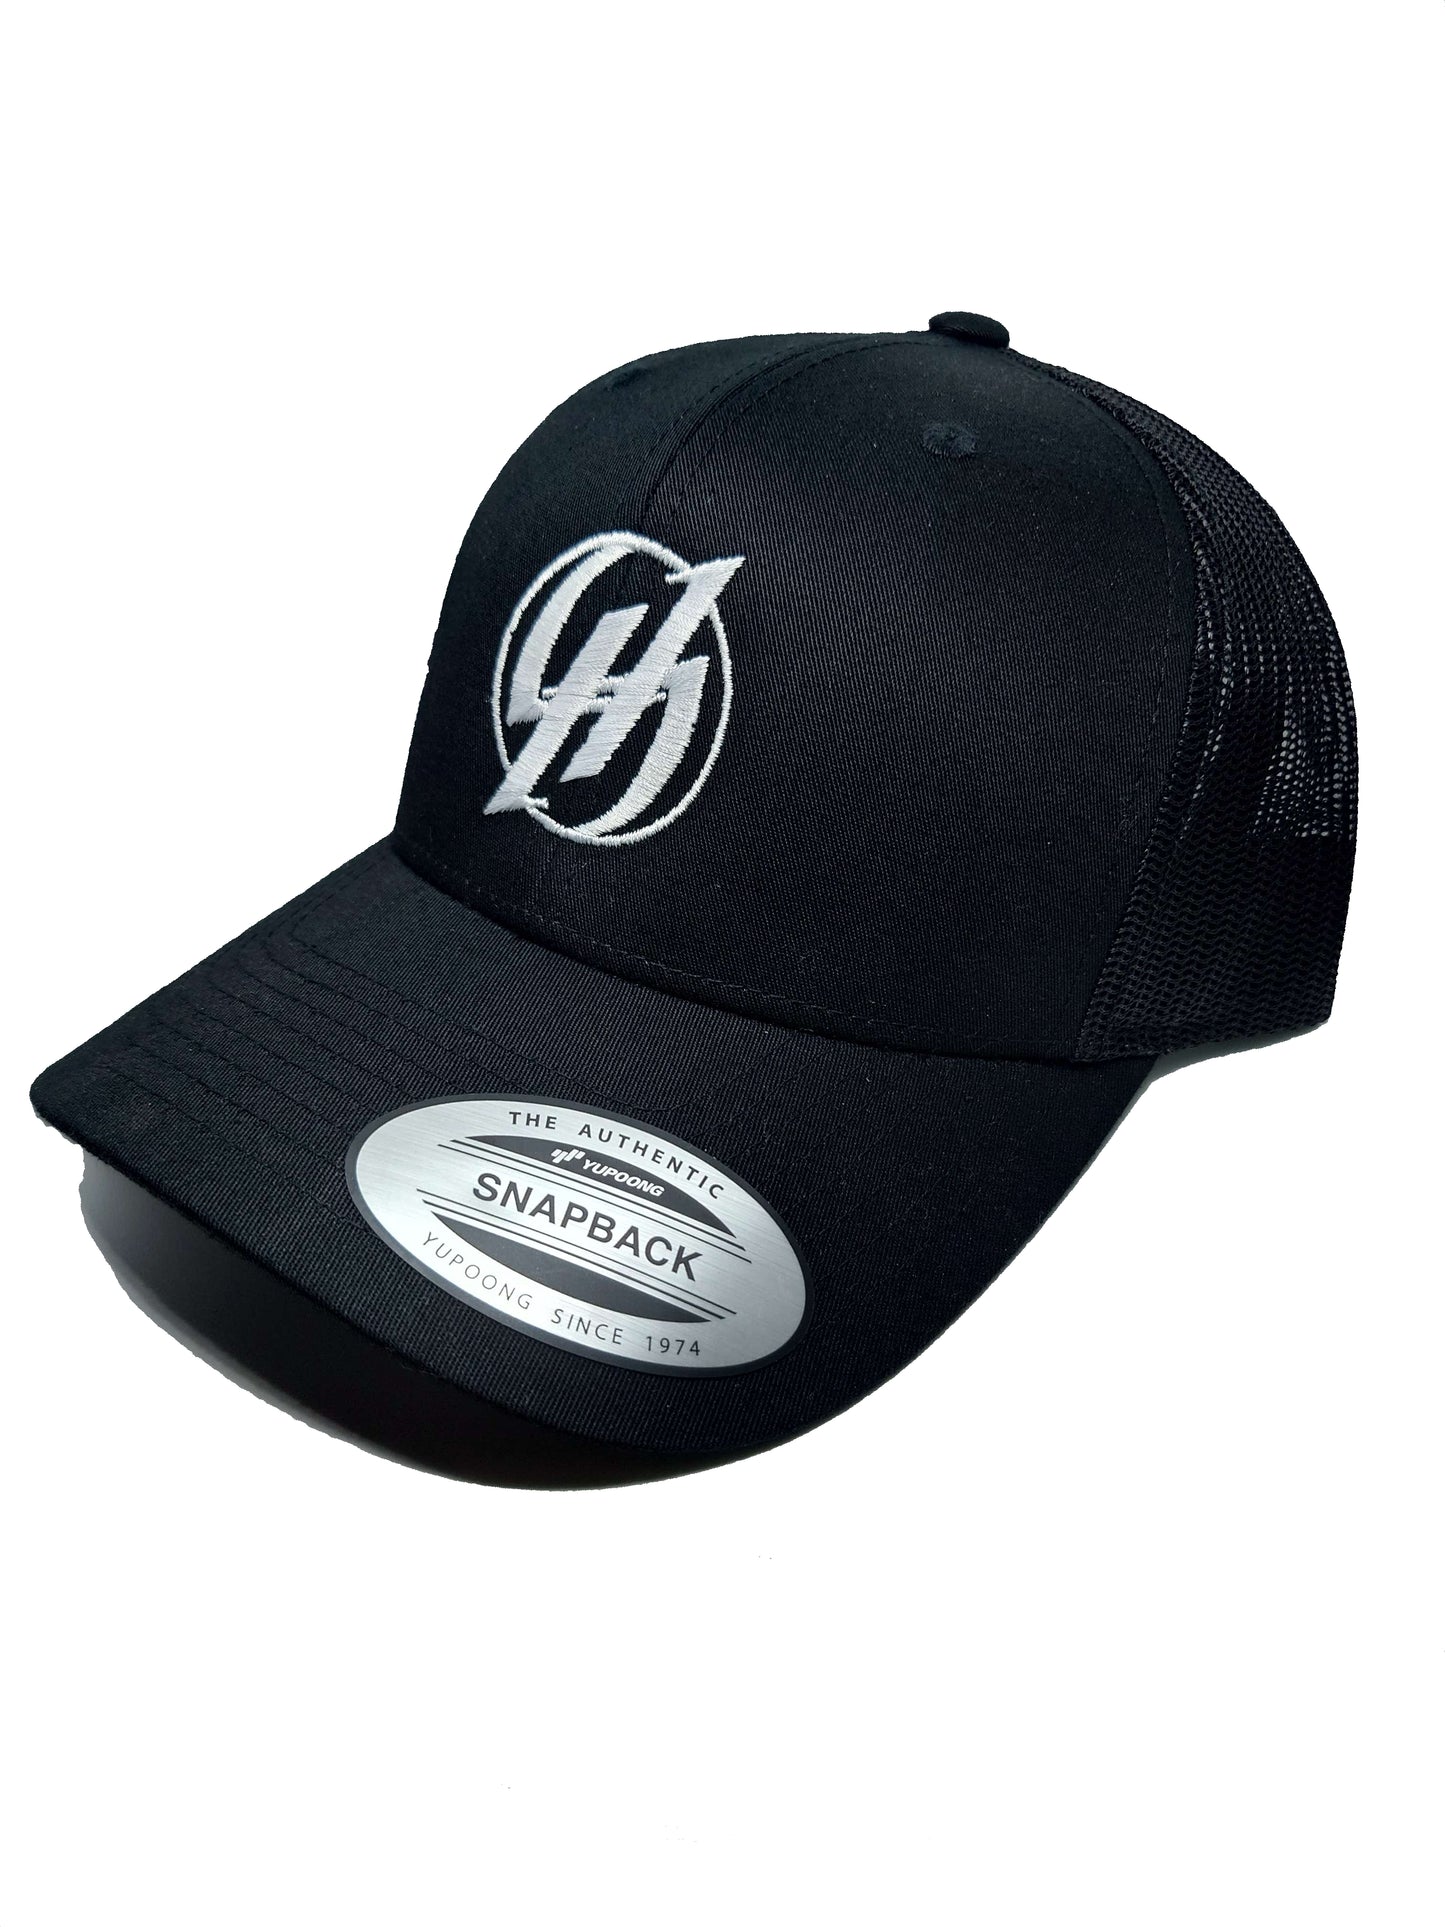 Hedra logo embroided Trucker Hat